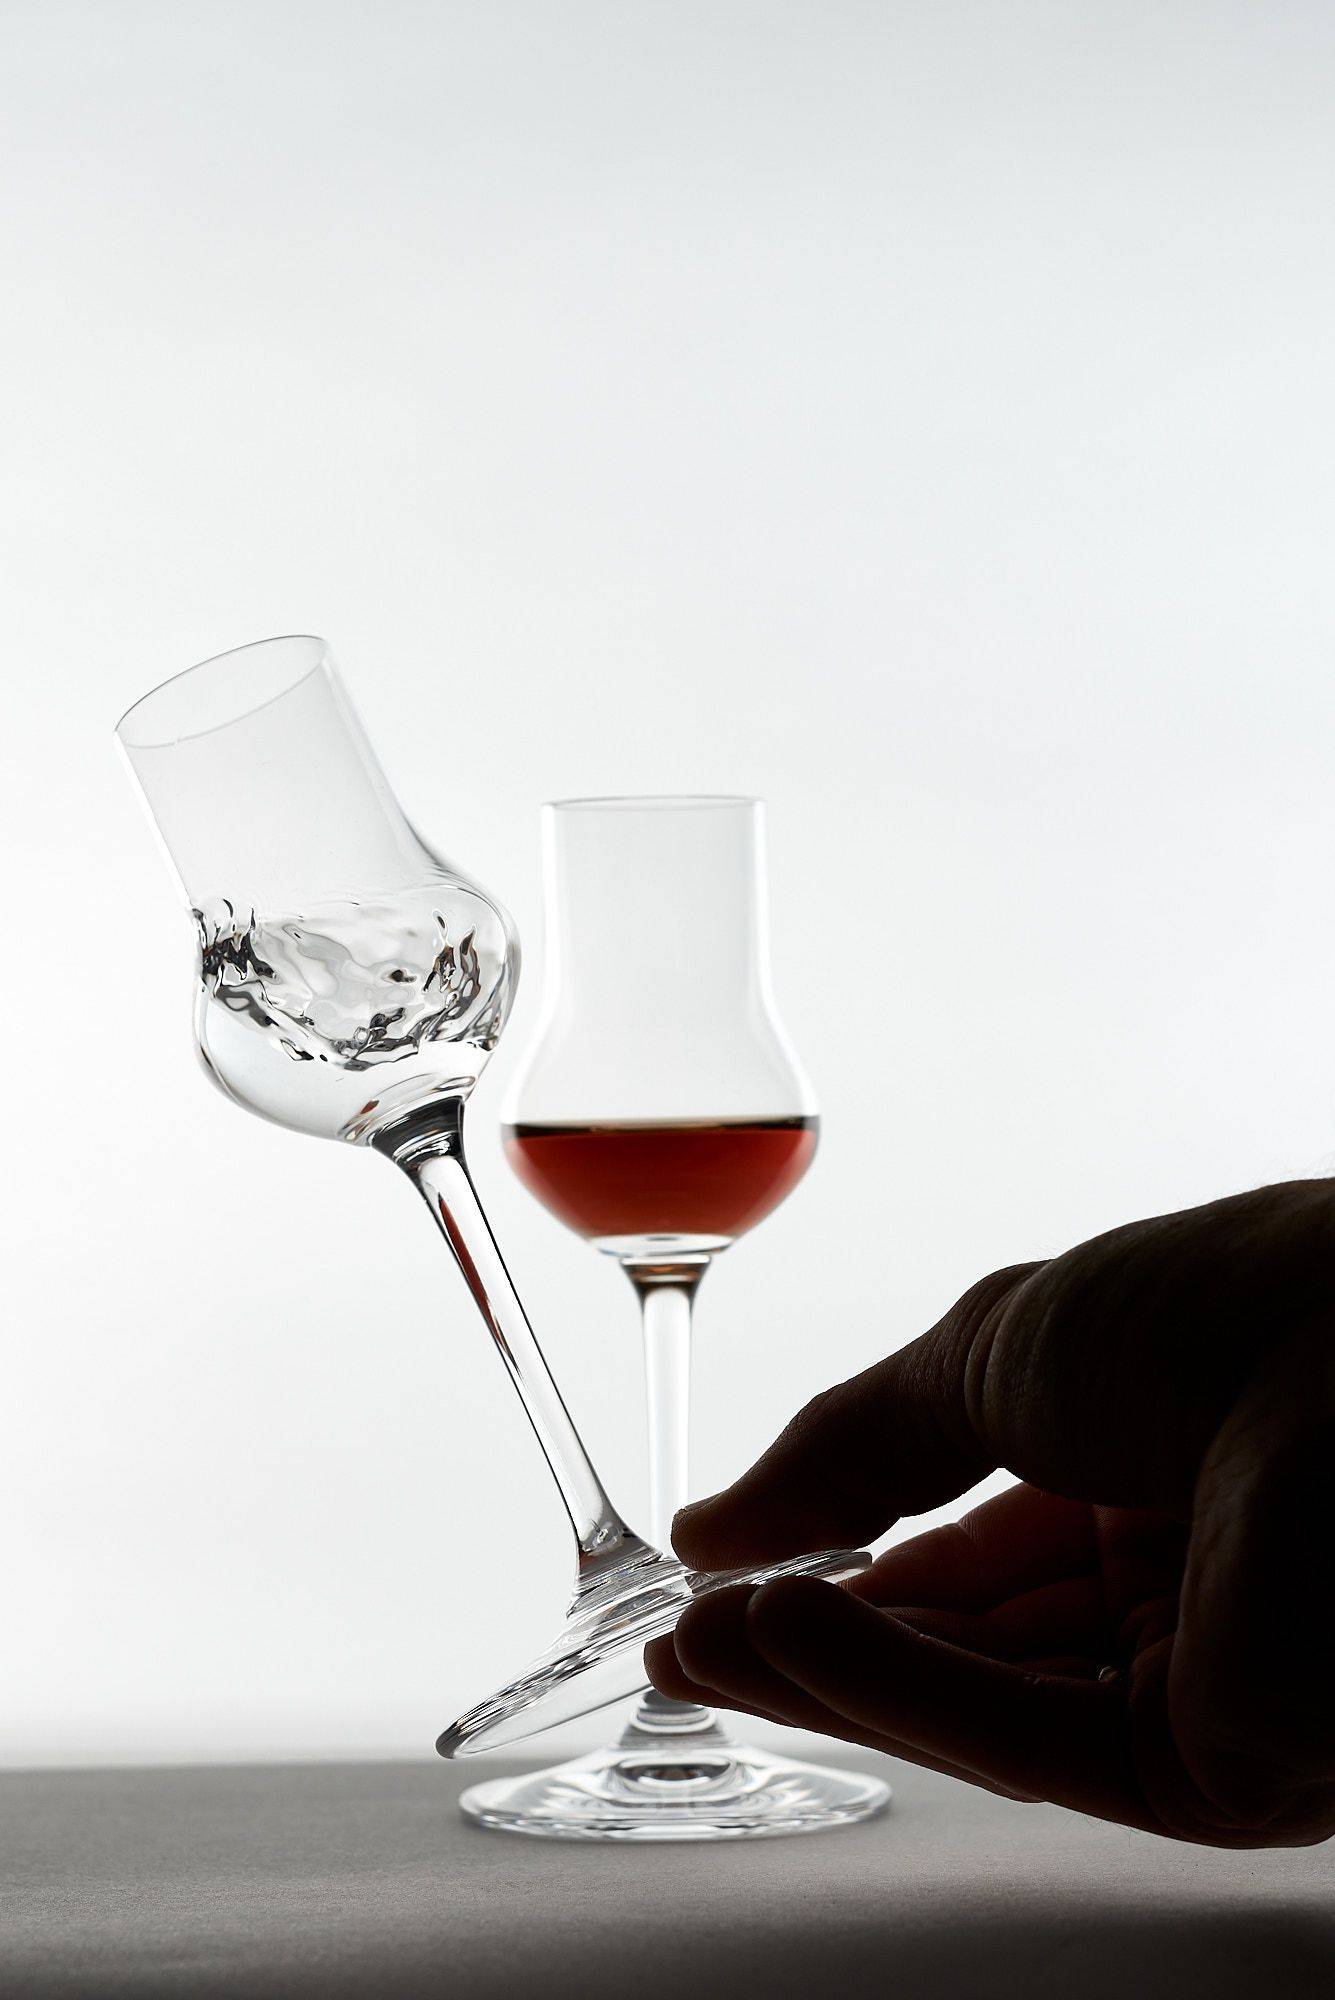 riedel veritas spirits and nosing glass on white background